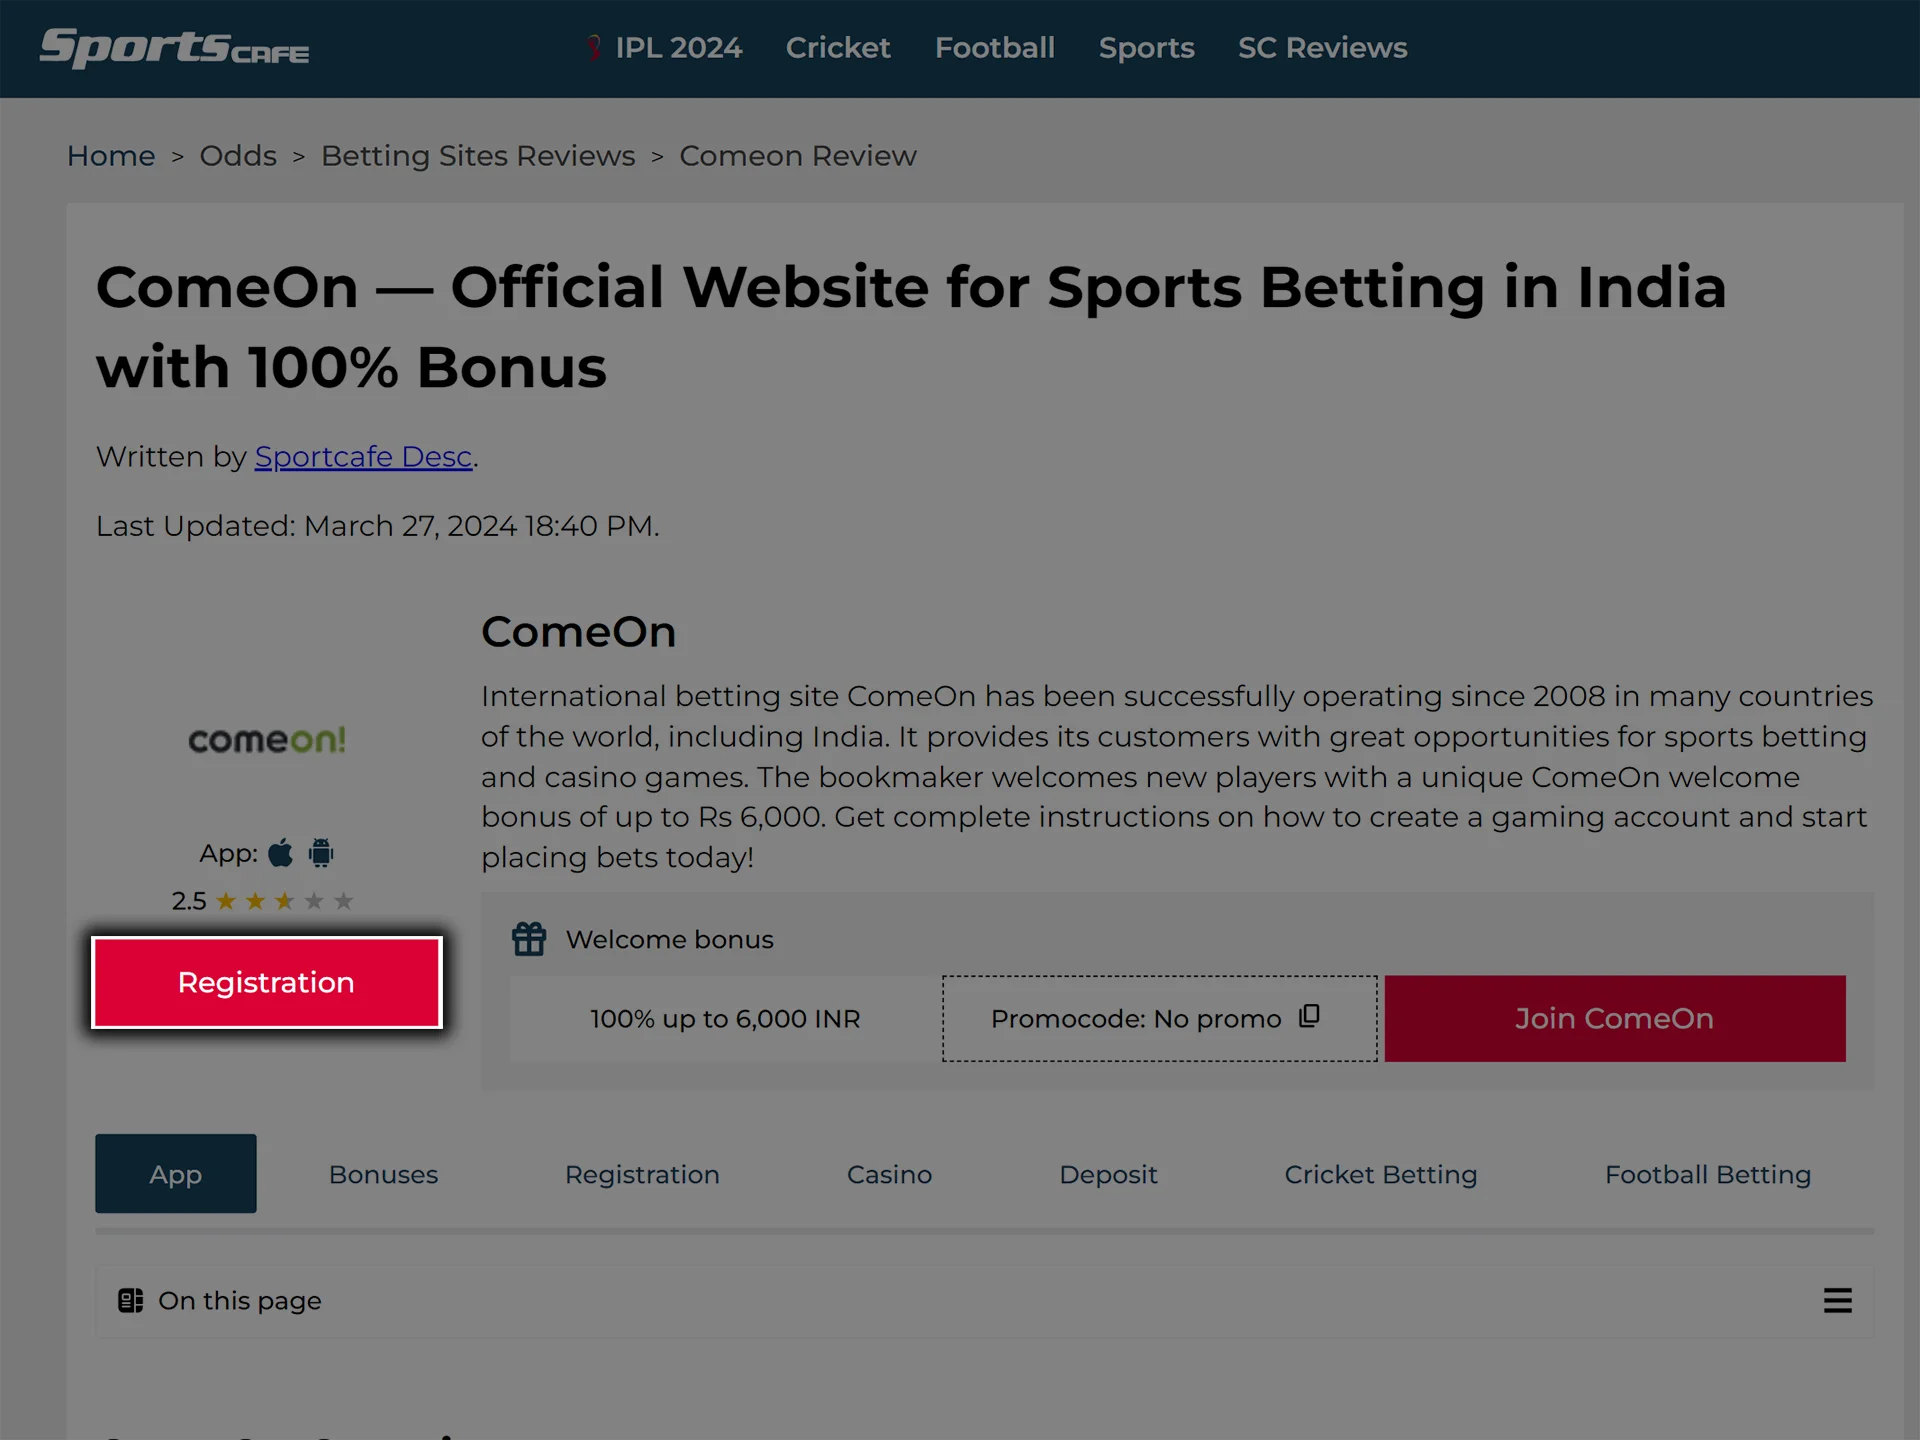 Open the ComeOn website using the link.